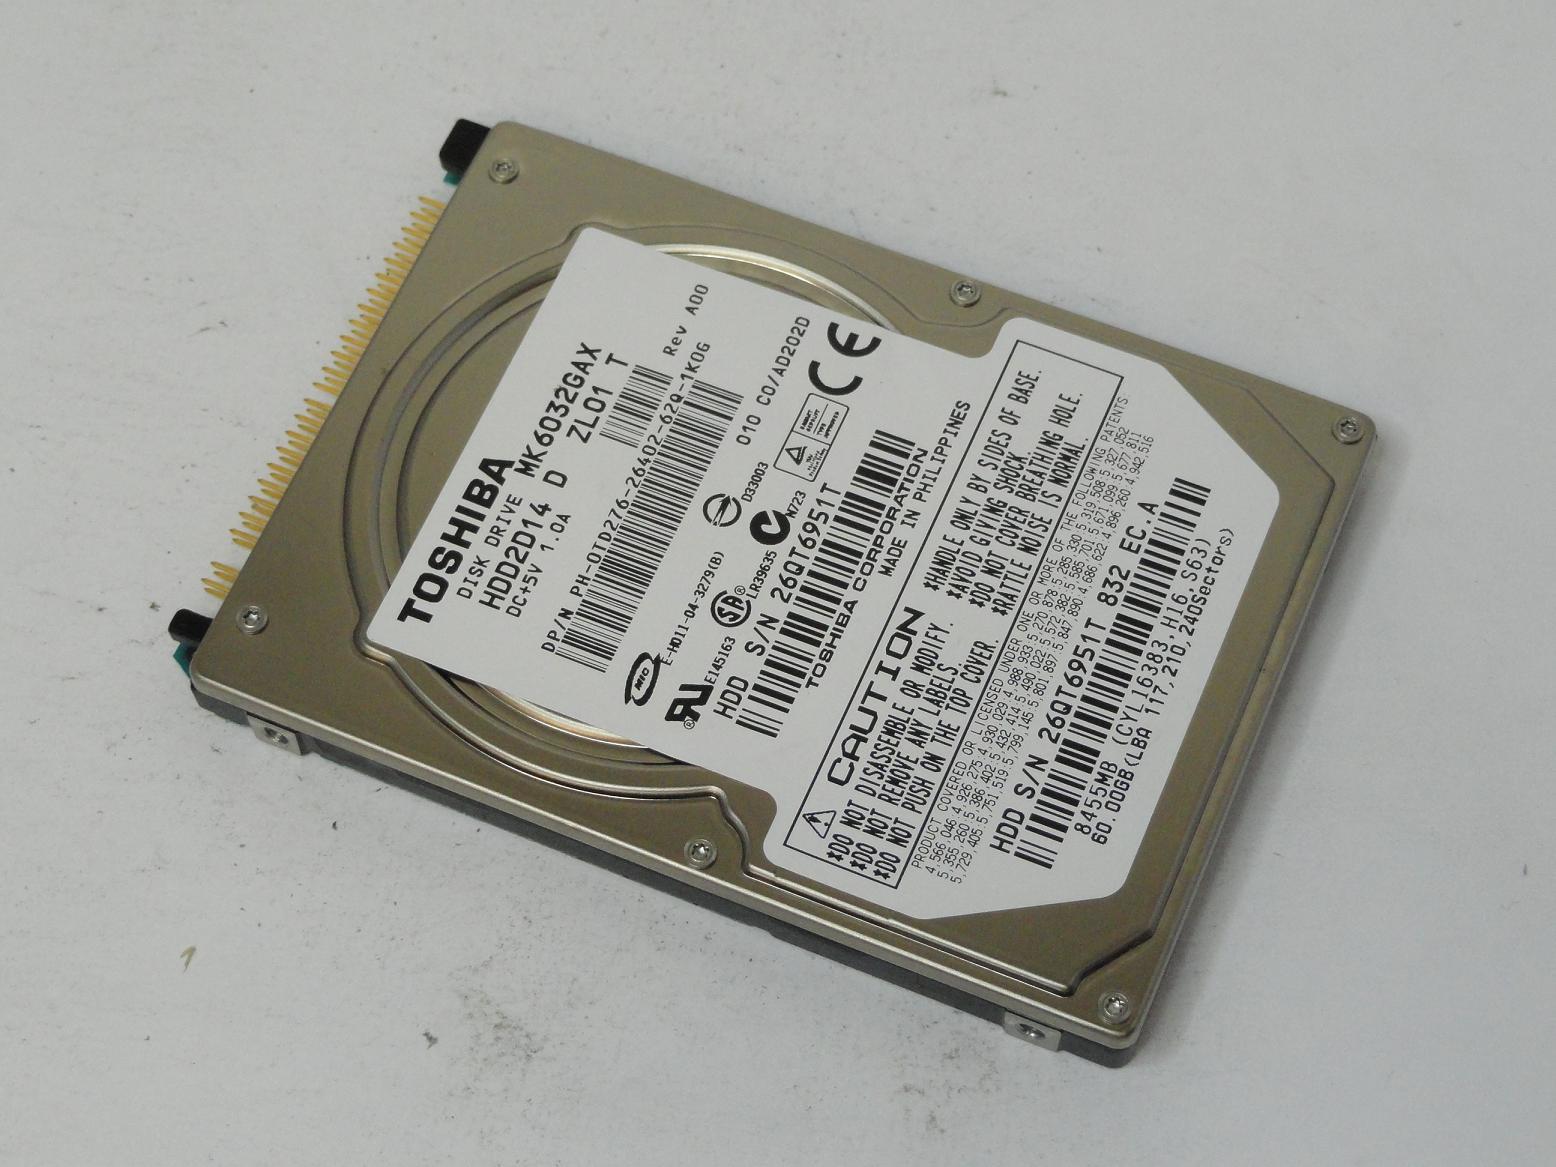 HDD2D14 - Toshiba Dell 60GB IDE 5400rpm 2.5in HDD - Refurbished